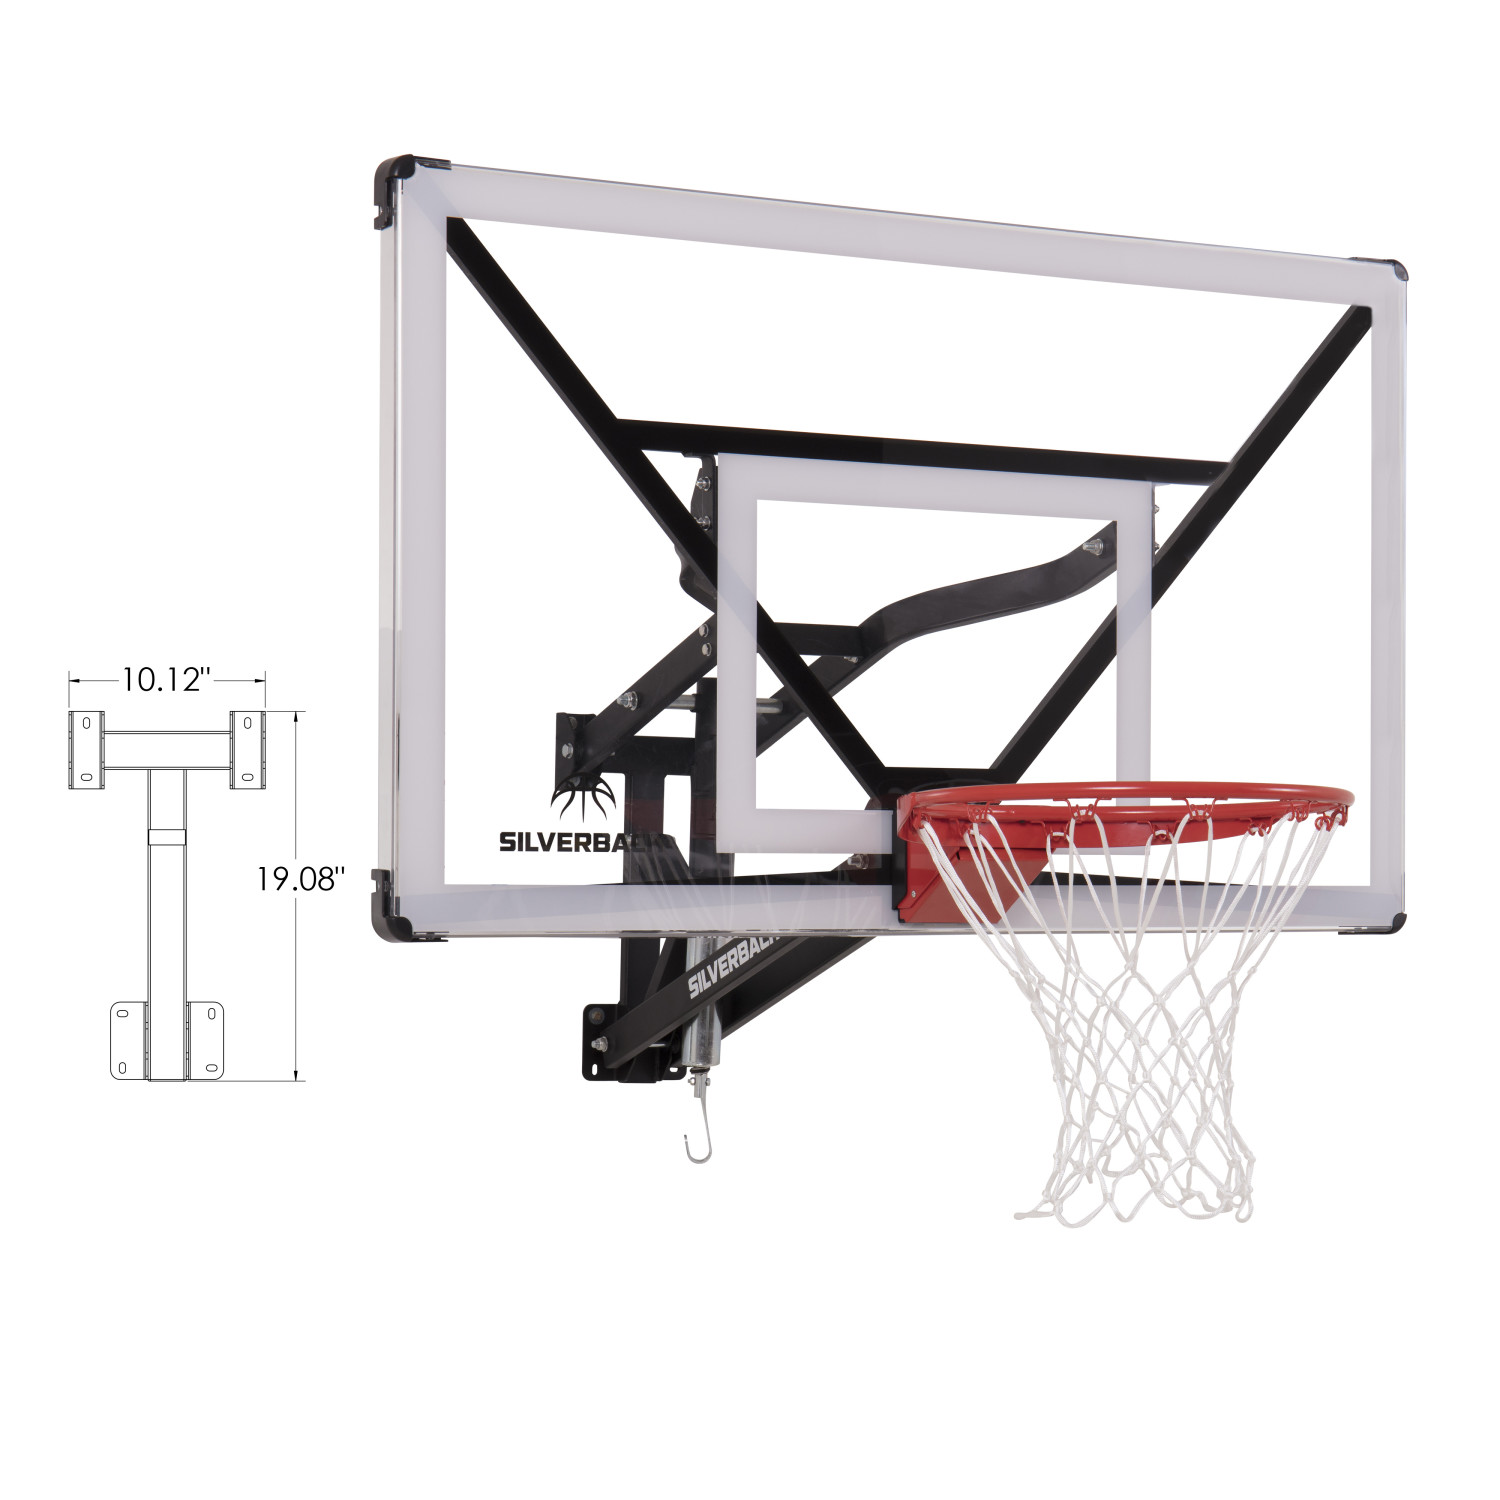 Silverback SBX 54" Wall Mounted Adjustable-Height Basketball Hoop with Quick Play Design - image 3 of 11